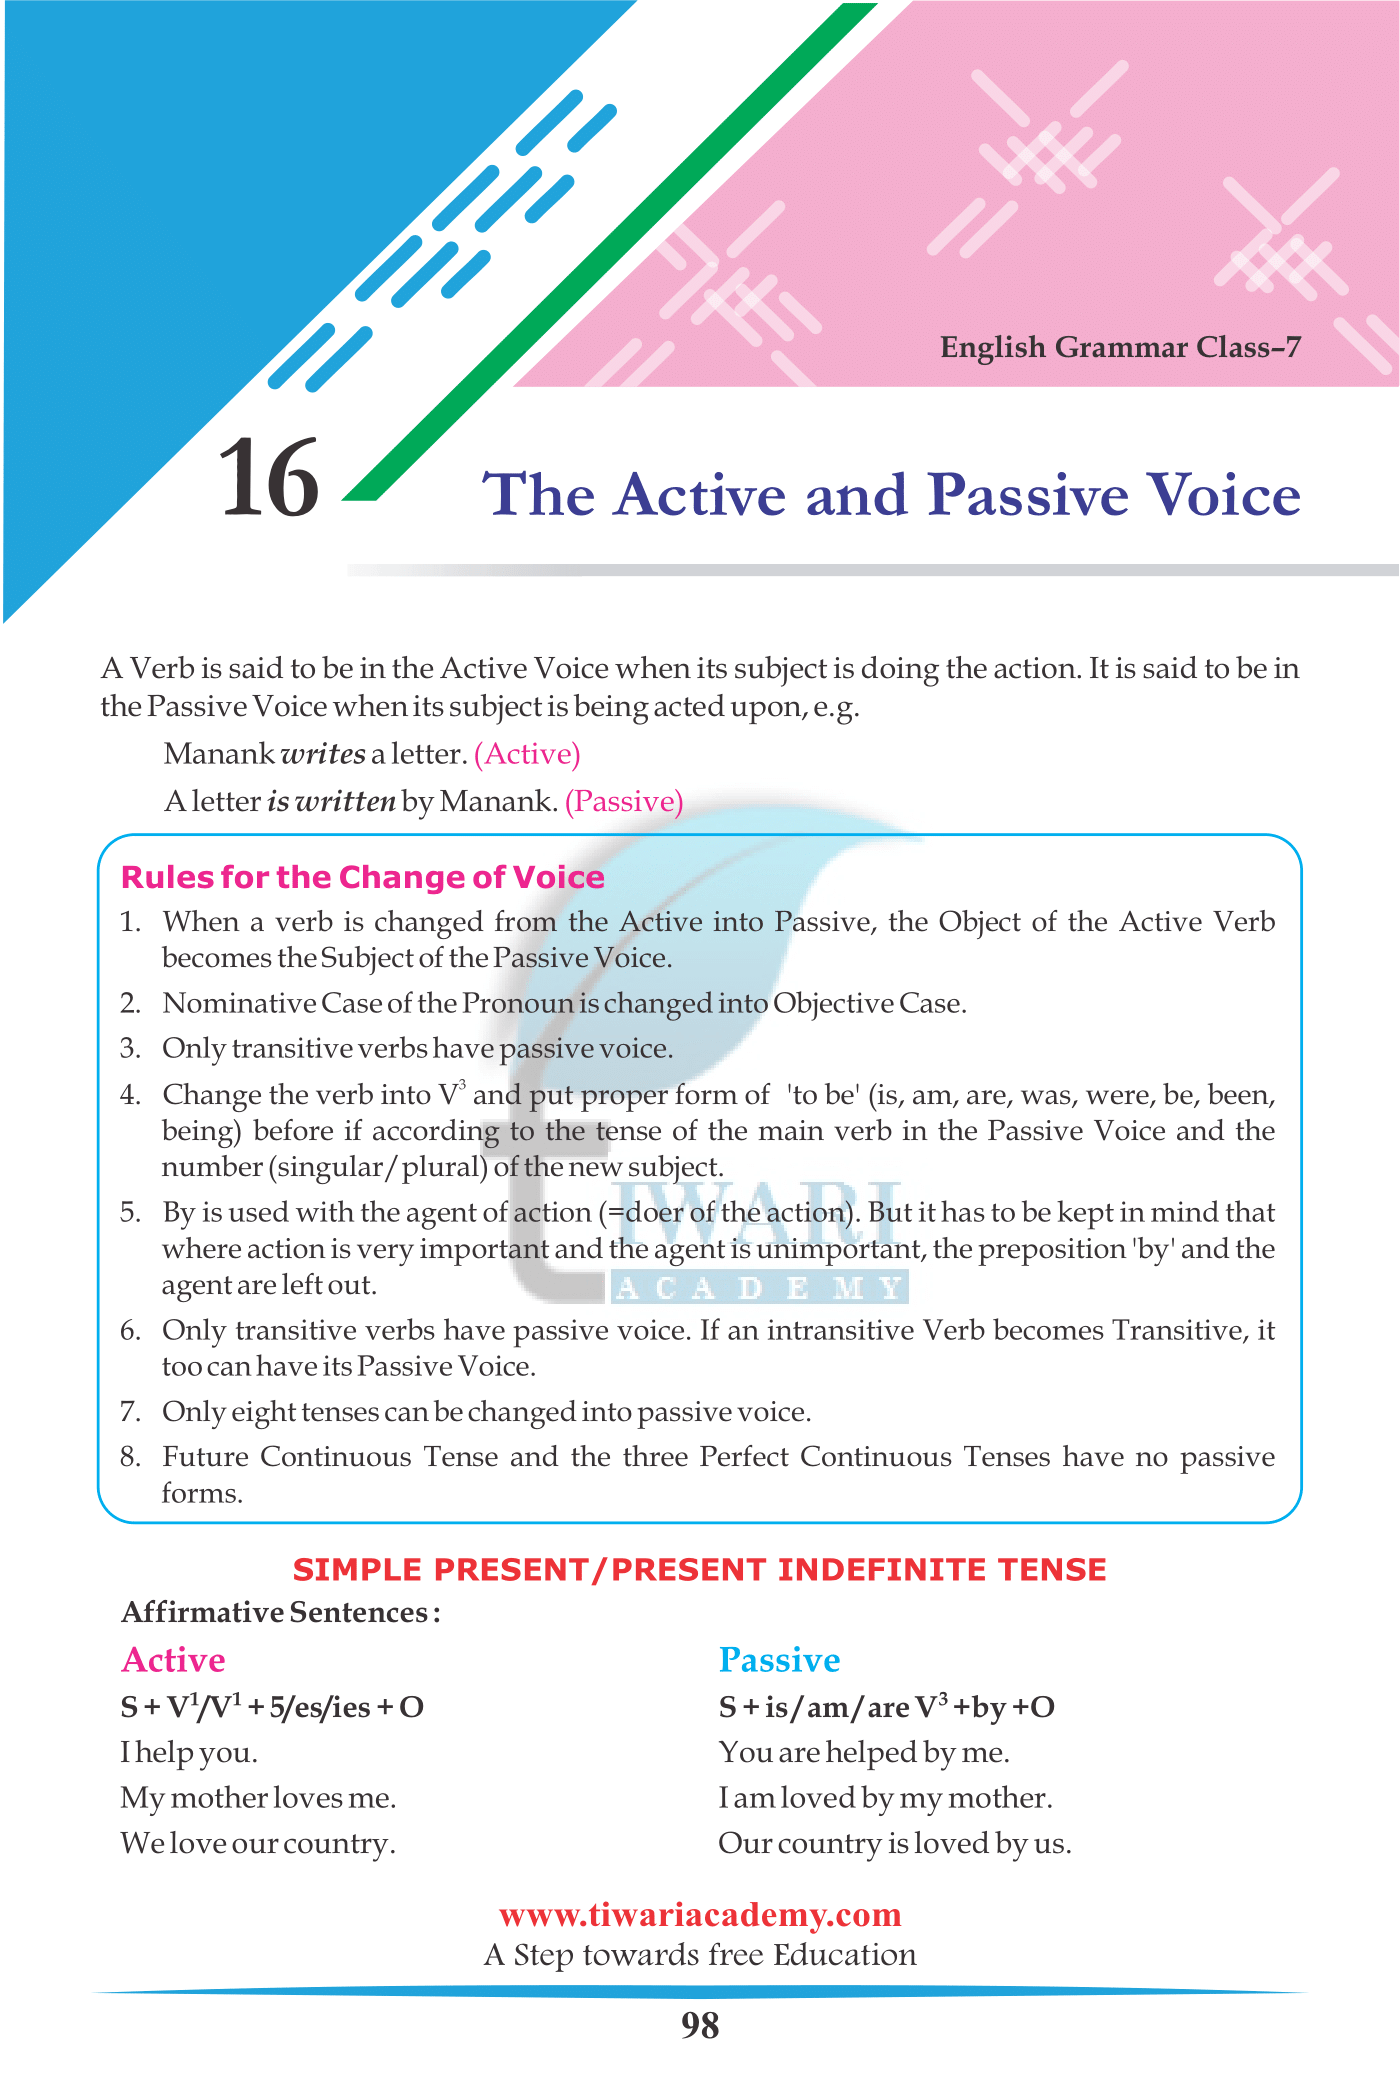 Class 7 English Grammar Chapter 16 The Active and Passive Voice with examples